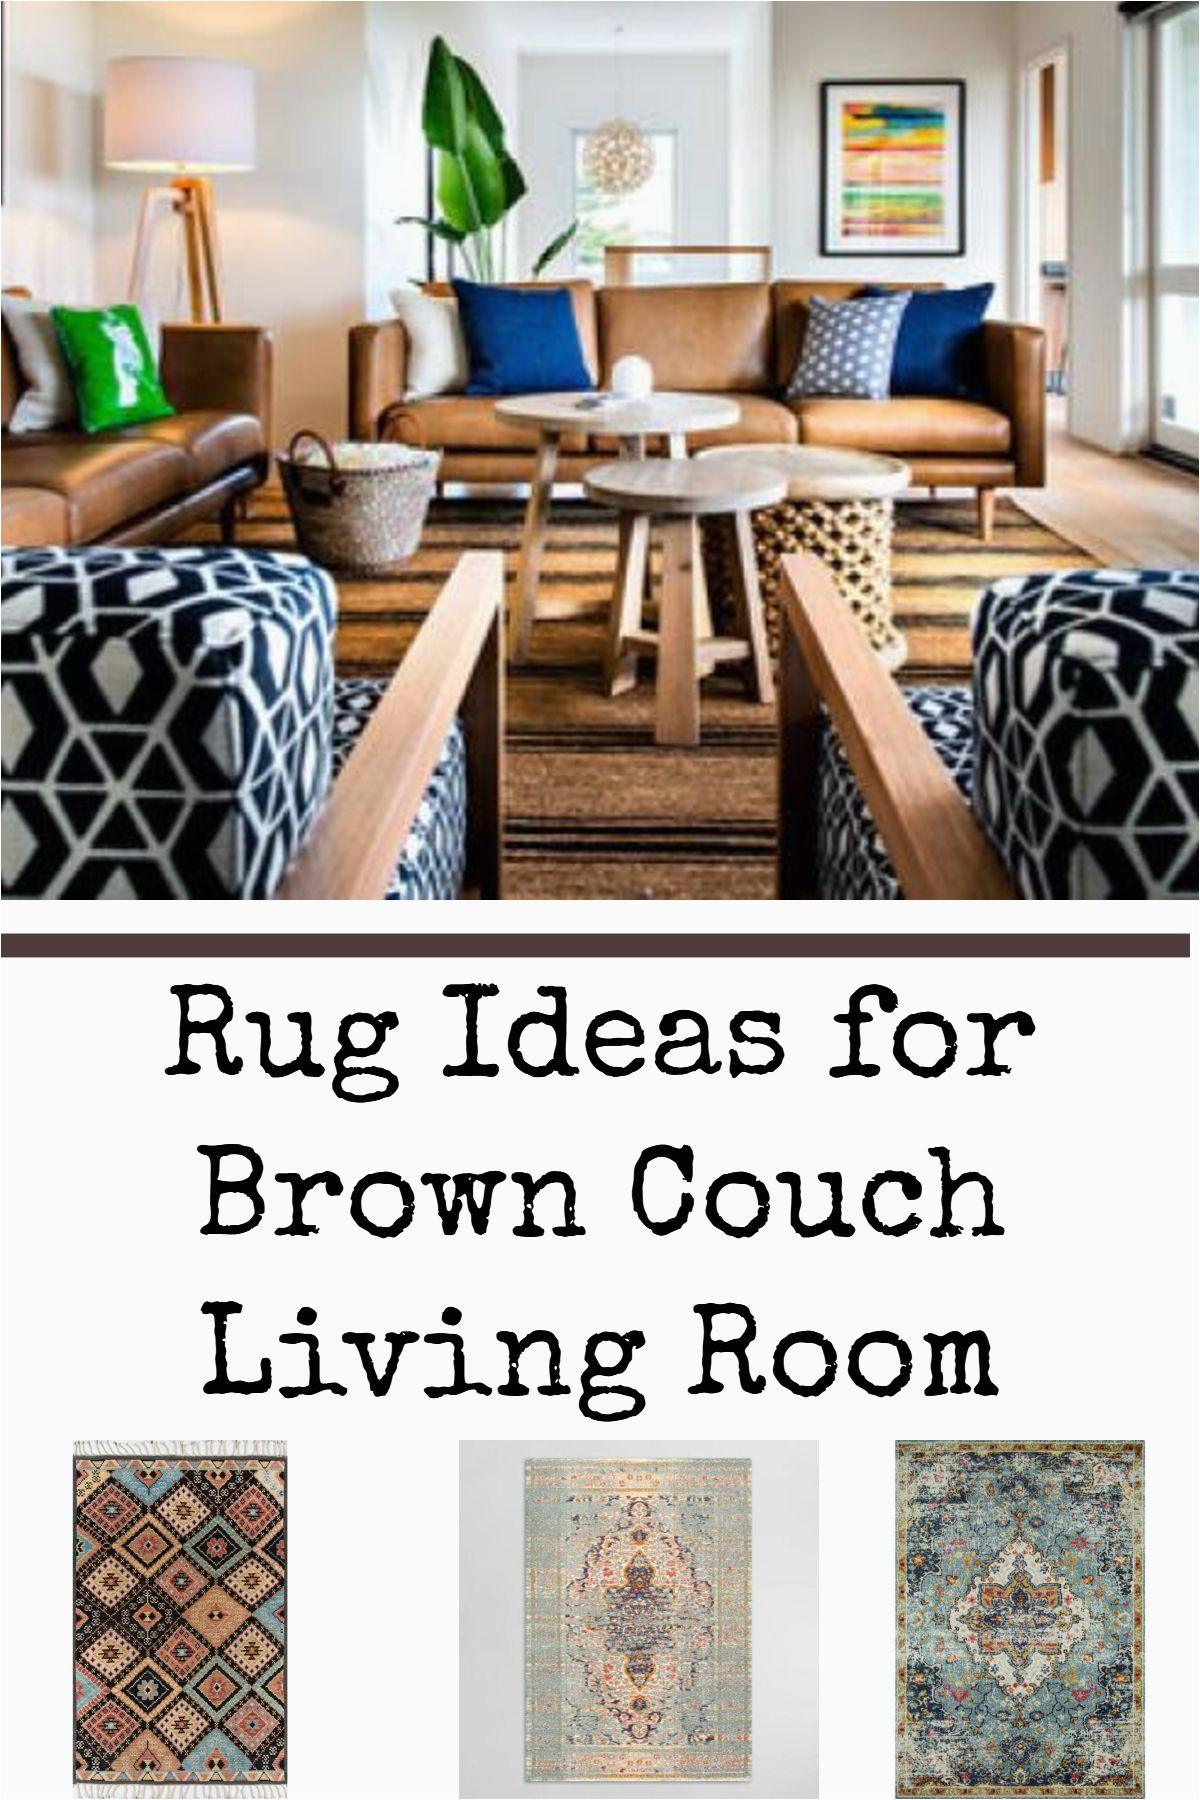 Blue and Brown Living Room Rugs Room Redo Get the Look Midcentury Living Room with Blue